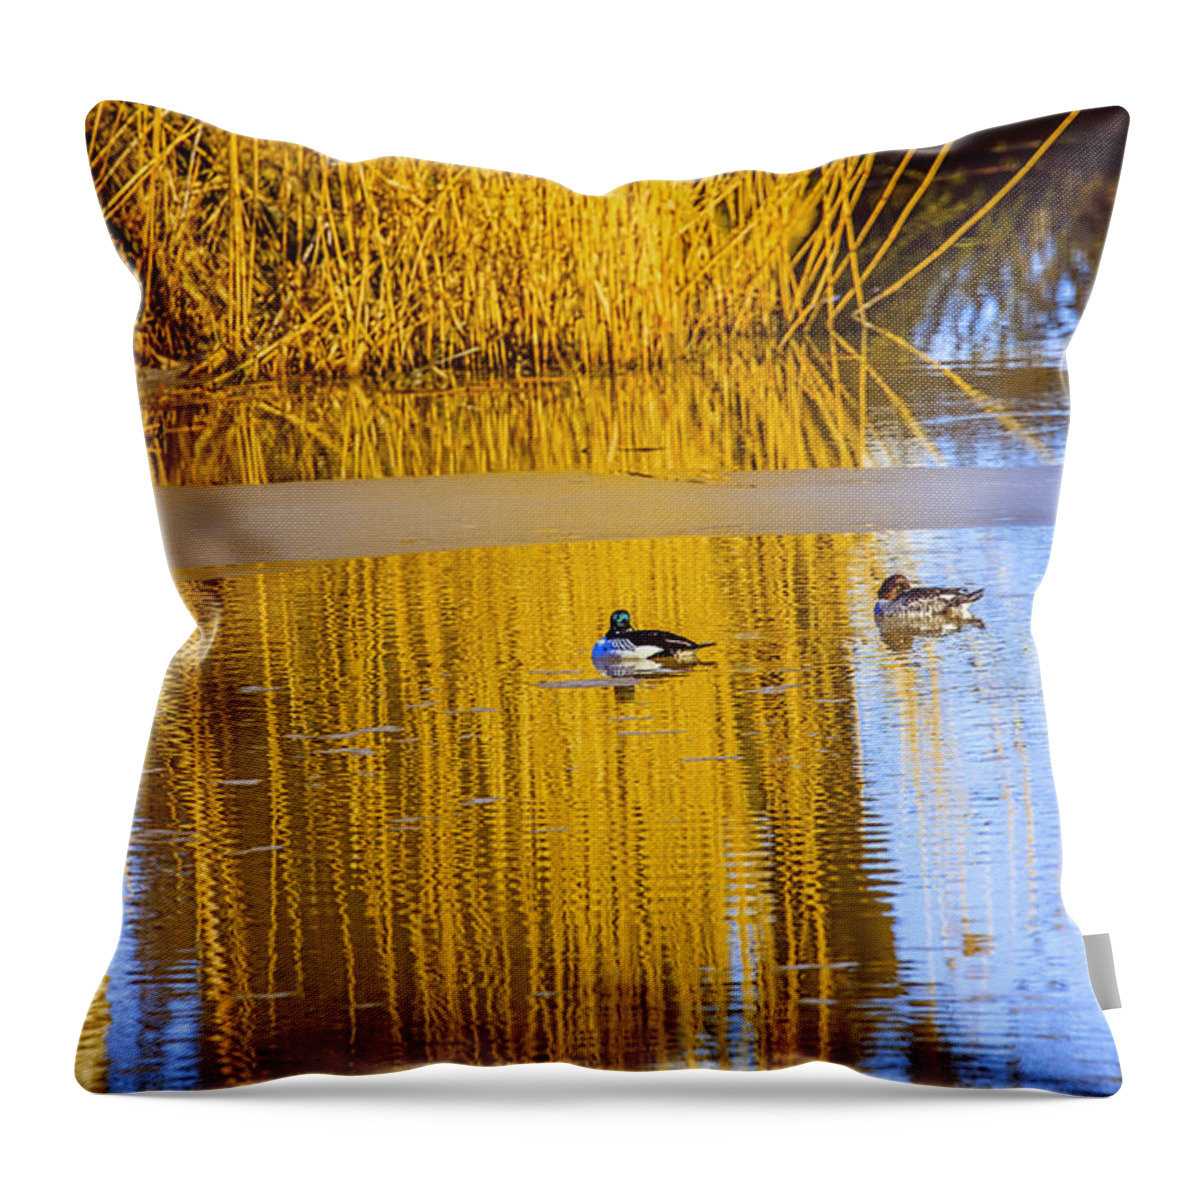 Dream.dreaming.bird Throw Pillow featuring the photograph Dreaming by Leif Sohlman